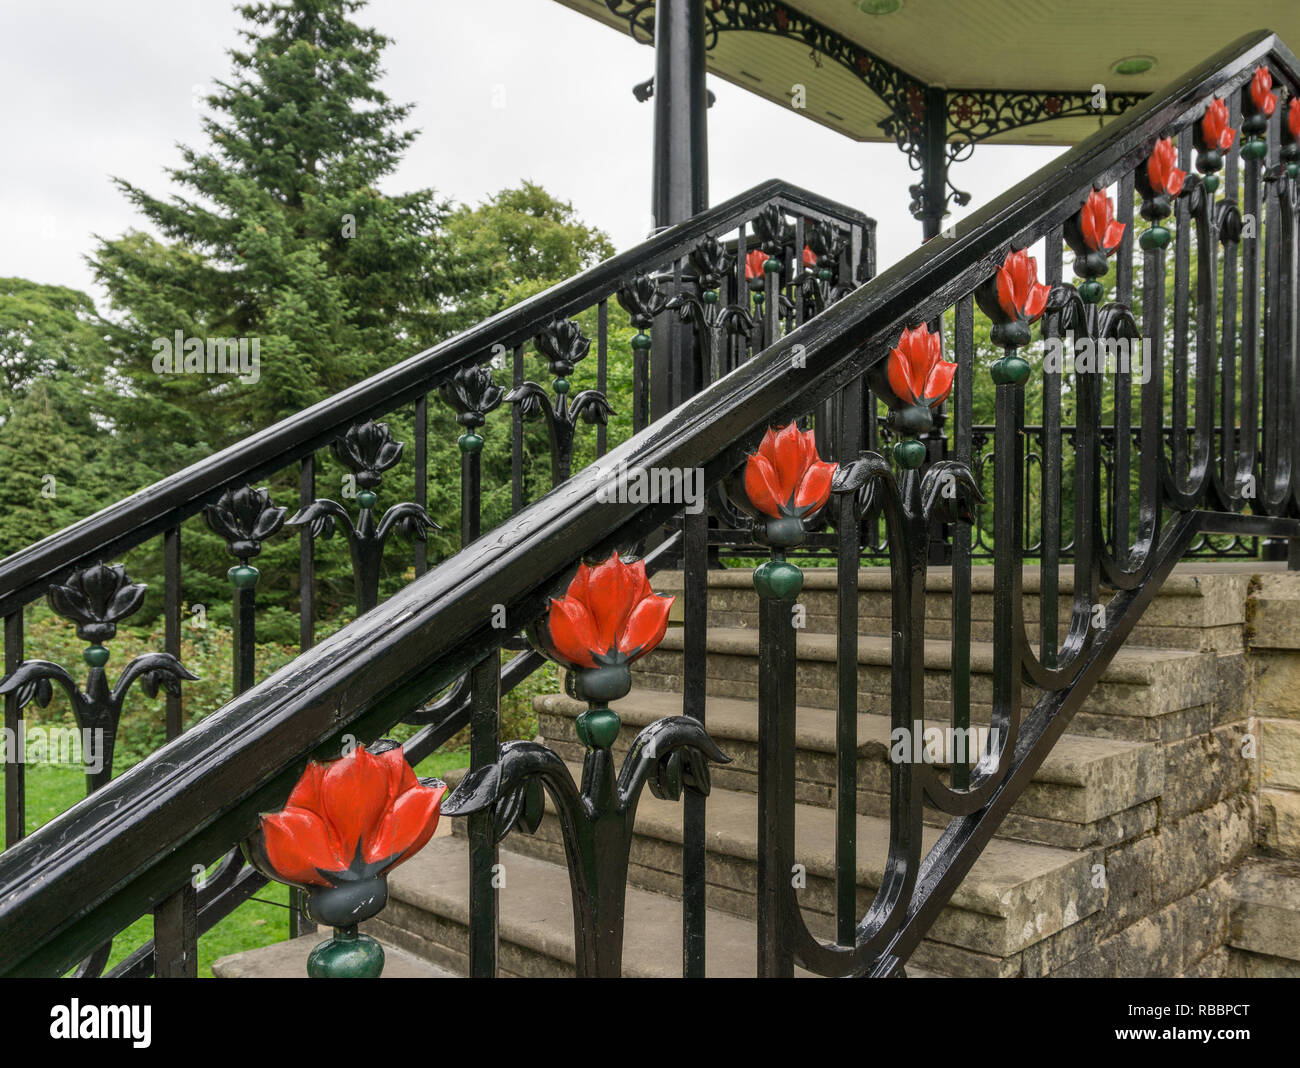 Decorative wrought iron railings with a floral motif on the bandstand in the Pavilion Gardens, Buxton, UK Stock Photo